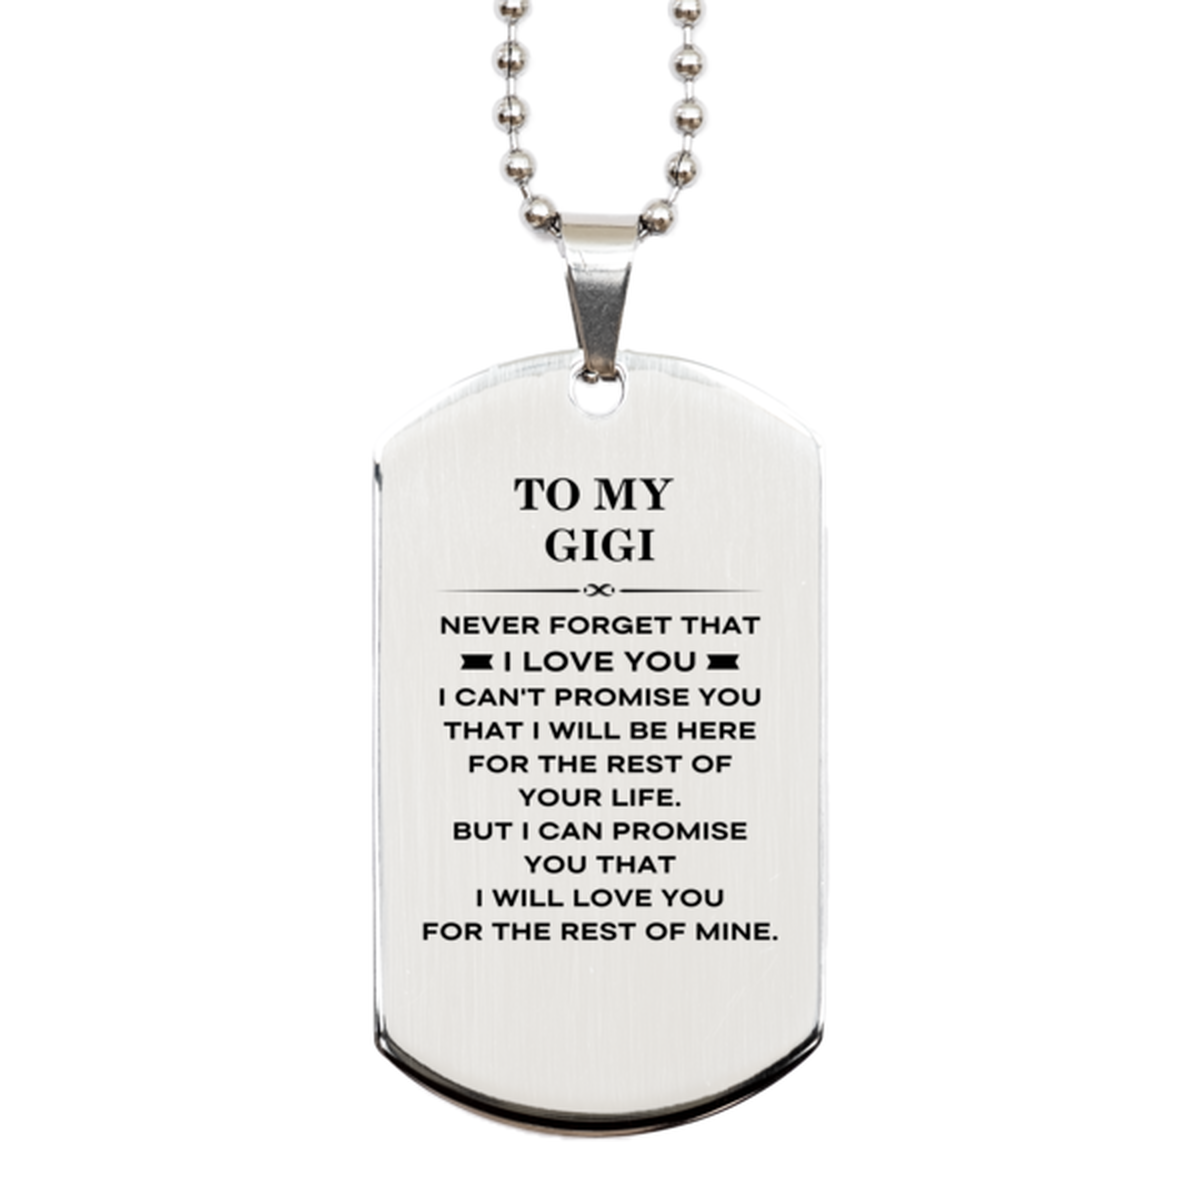 To My Gigi Gifts, I will love you for the rest of mine, Love Gigi Dog Tag Necklace, Birthday Christmas Unique Silver Dog Tag For Gigi